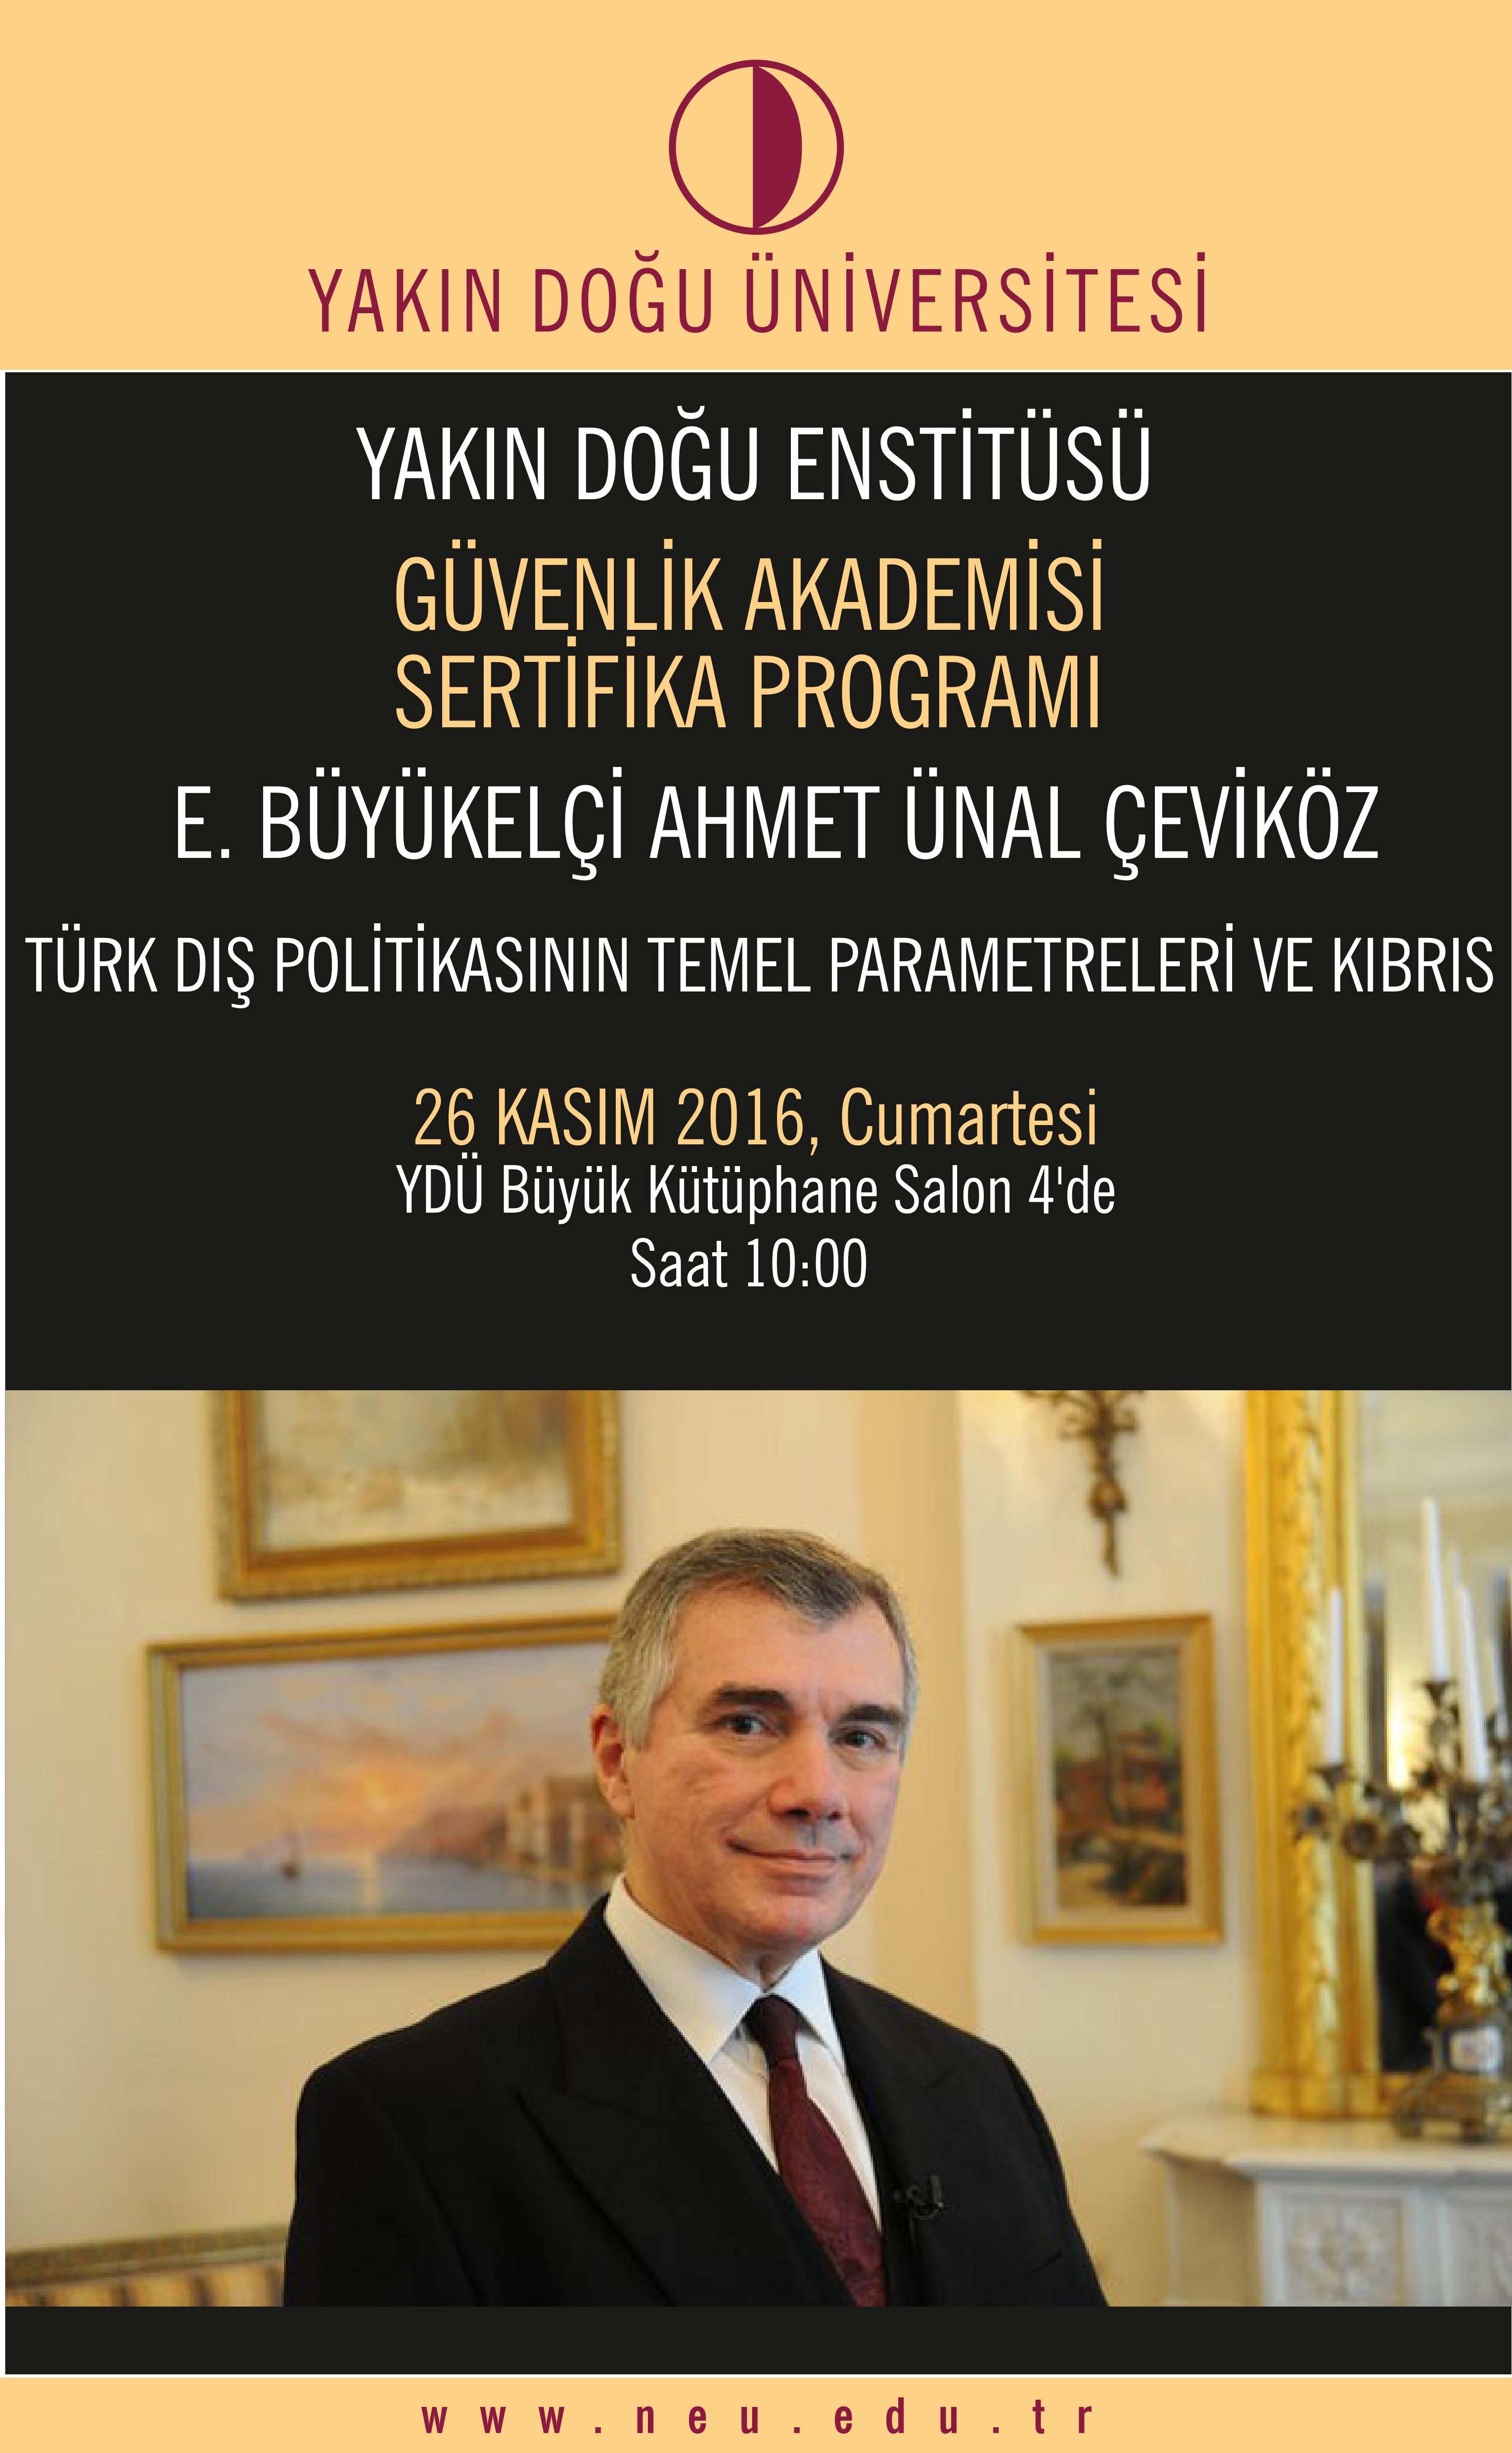 Turkish foreign policy in negotiating process and the future of Cyprus to be discussed at Near East University